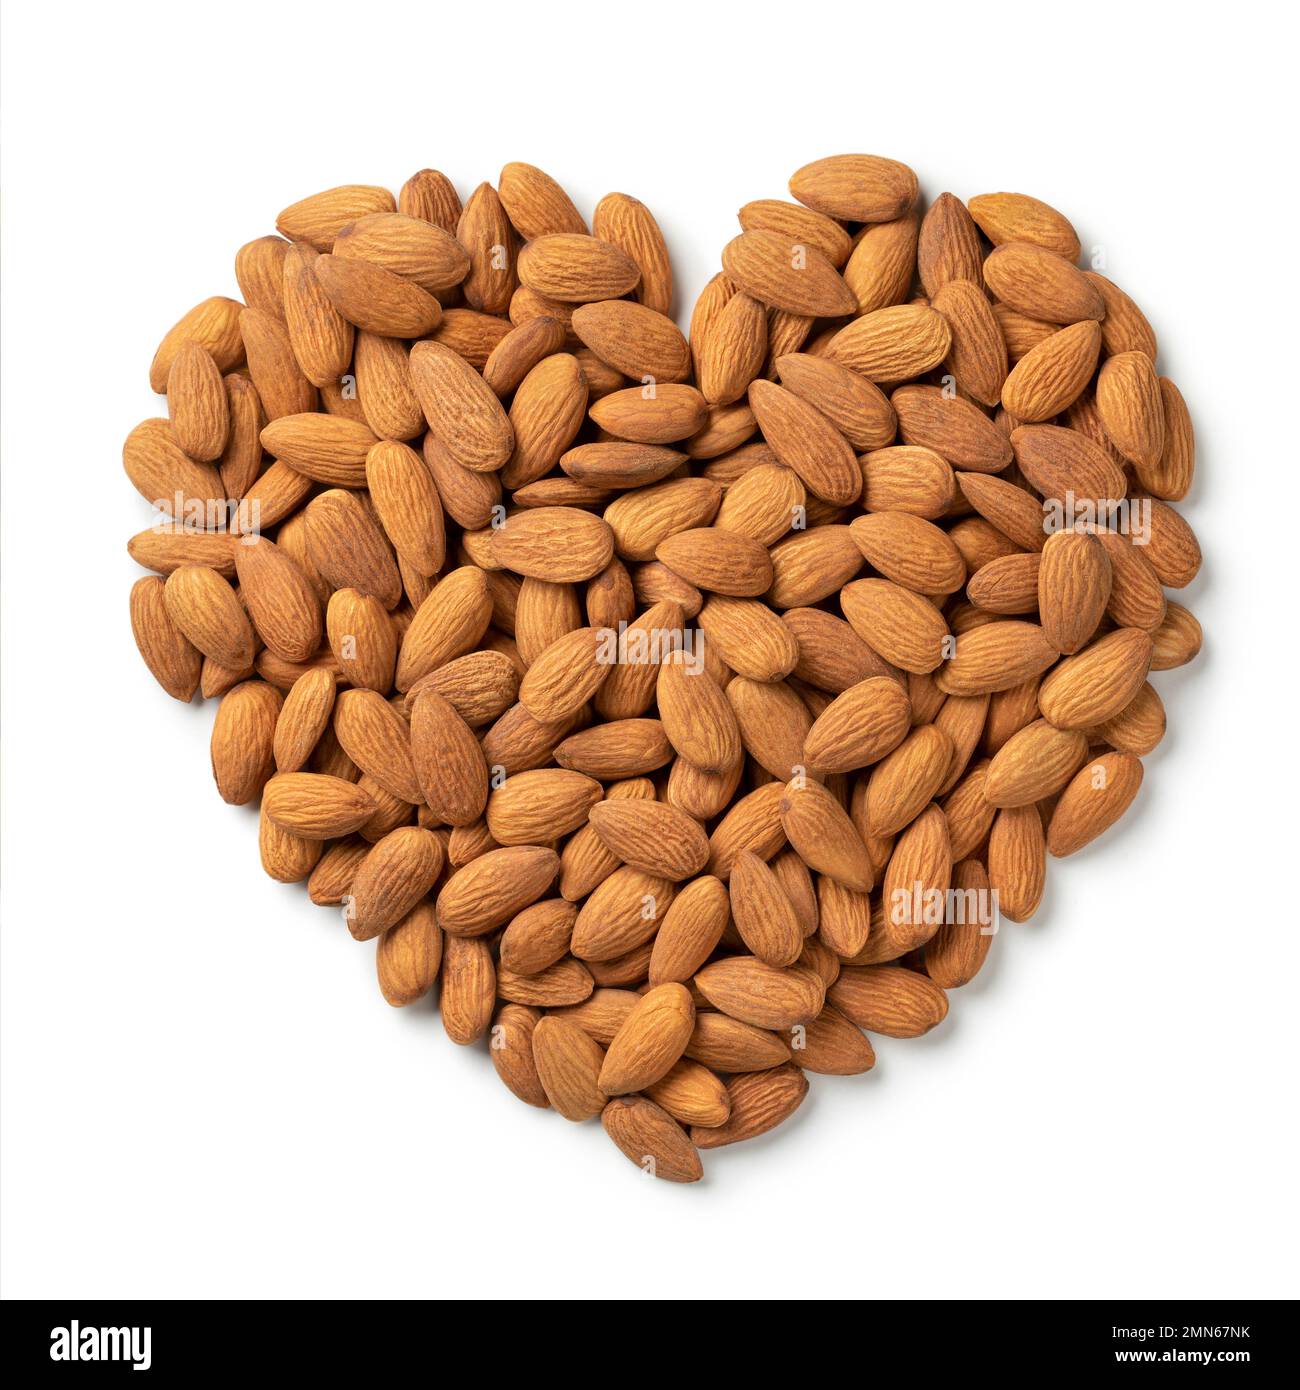 Almonds in heart shape isolated on white background Stock Photo